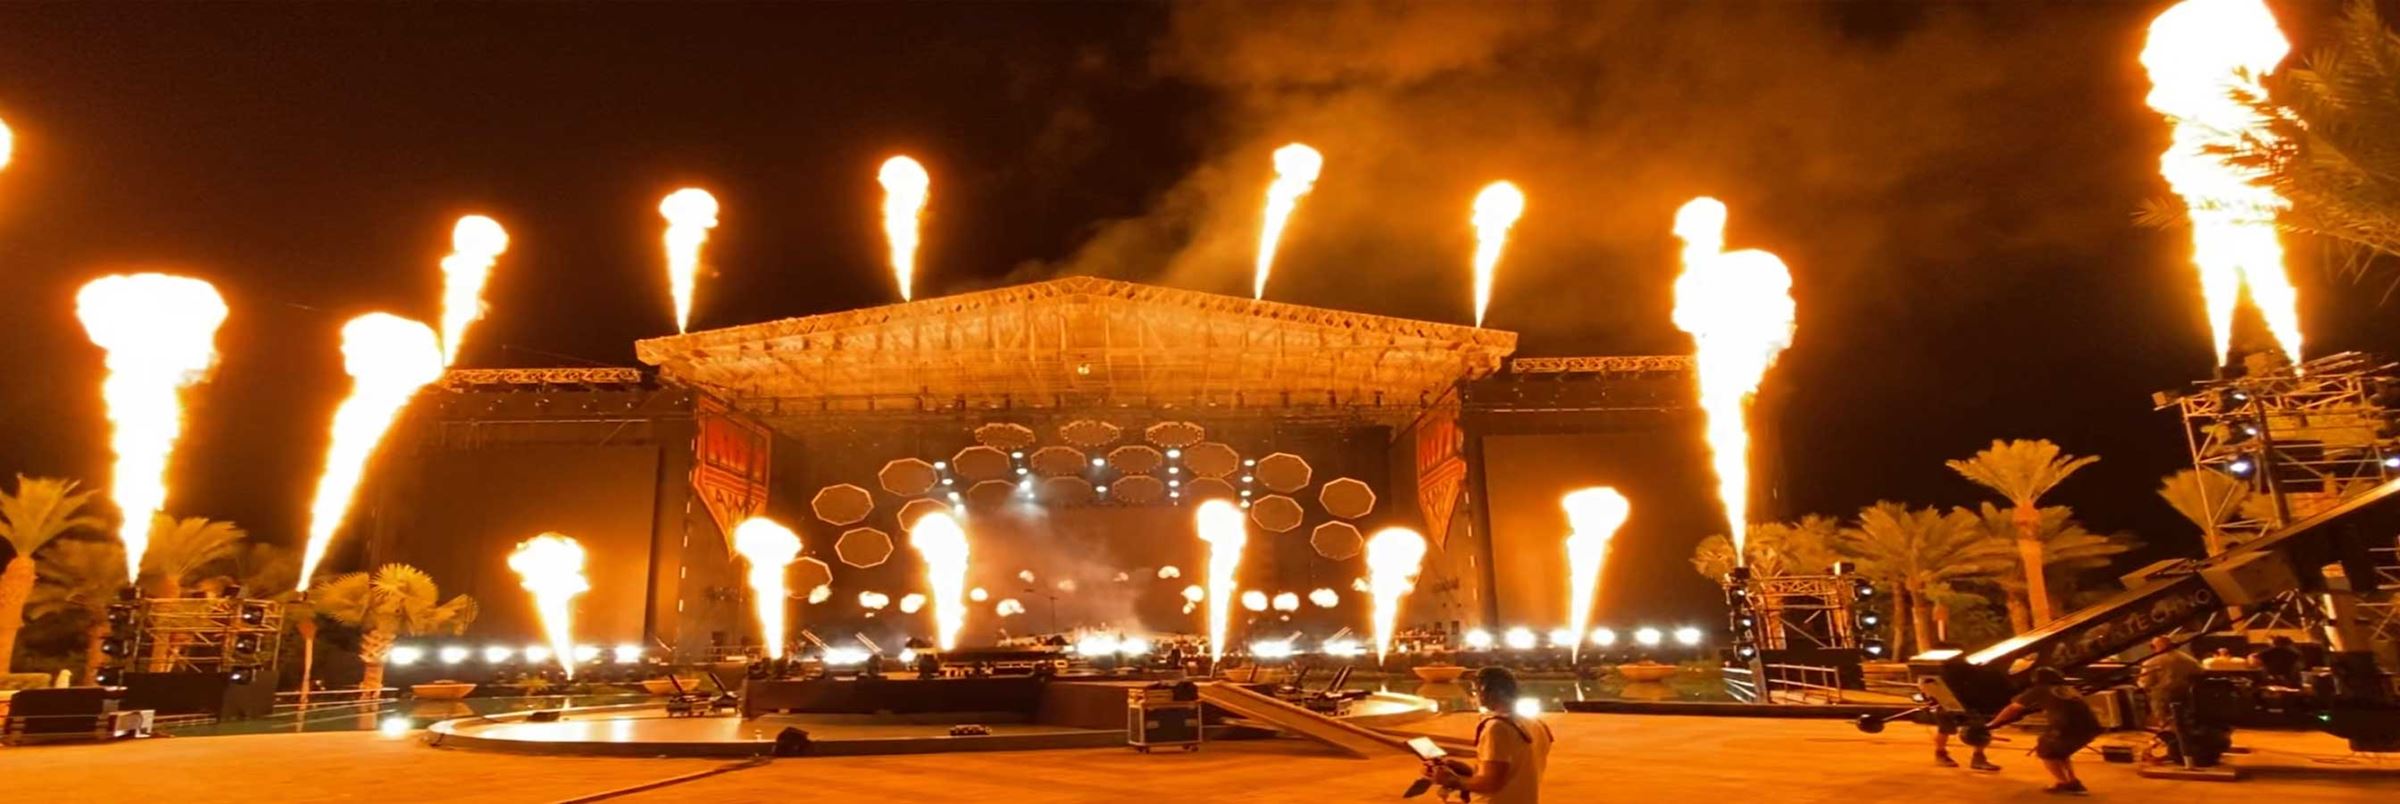 A massive stage is dotted with daunting flames and a mass of lights scattered al around. The stage also has a massive screen.